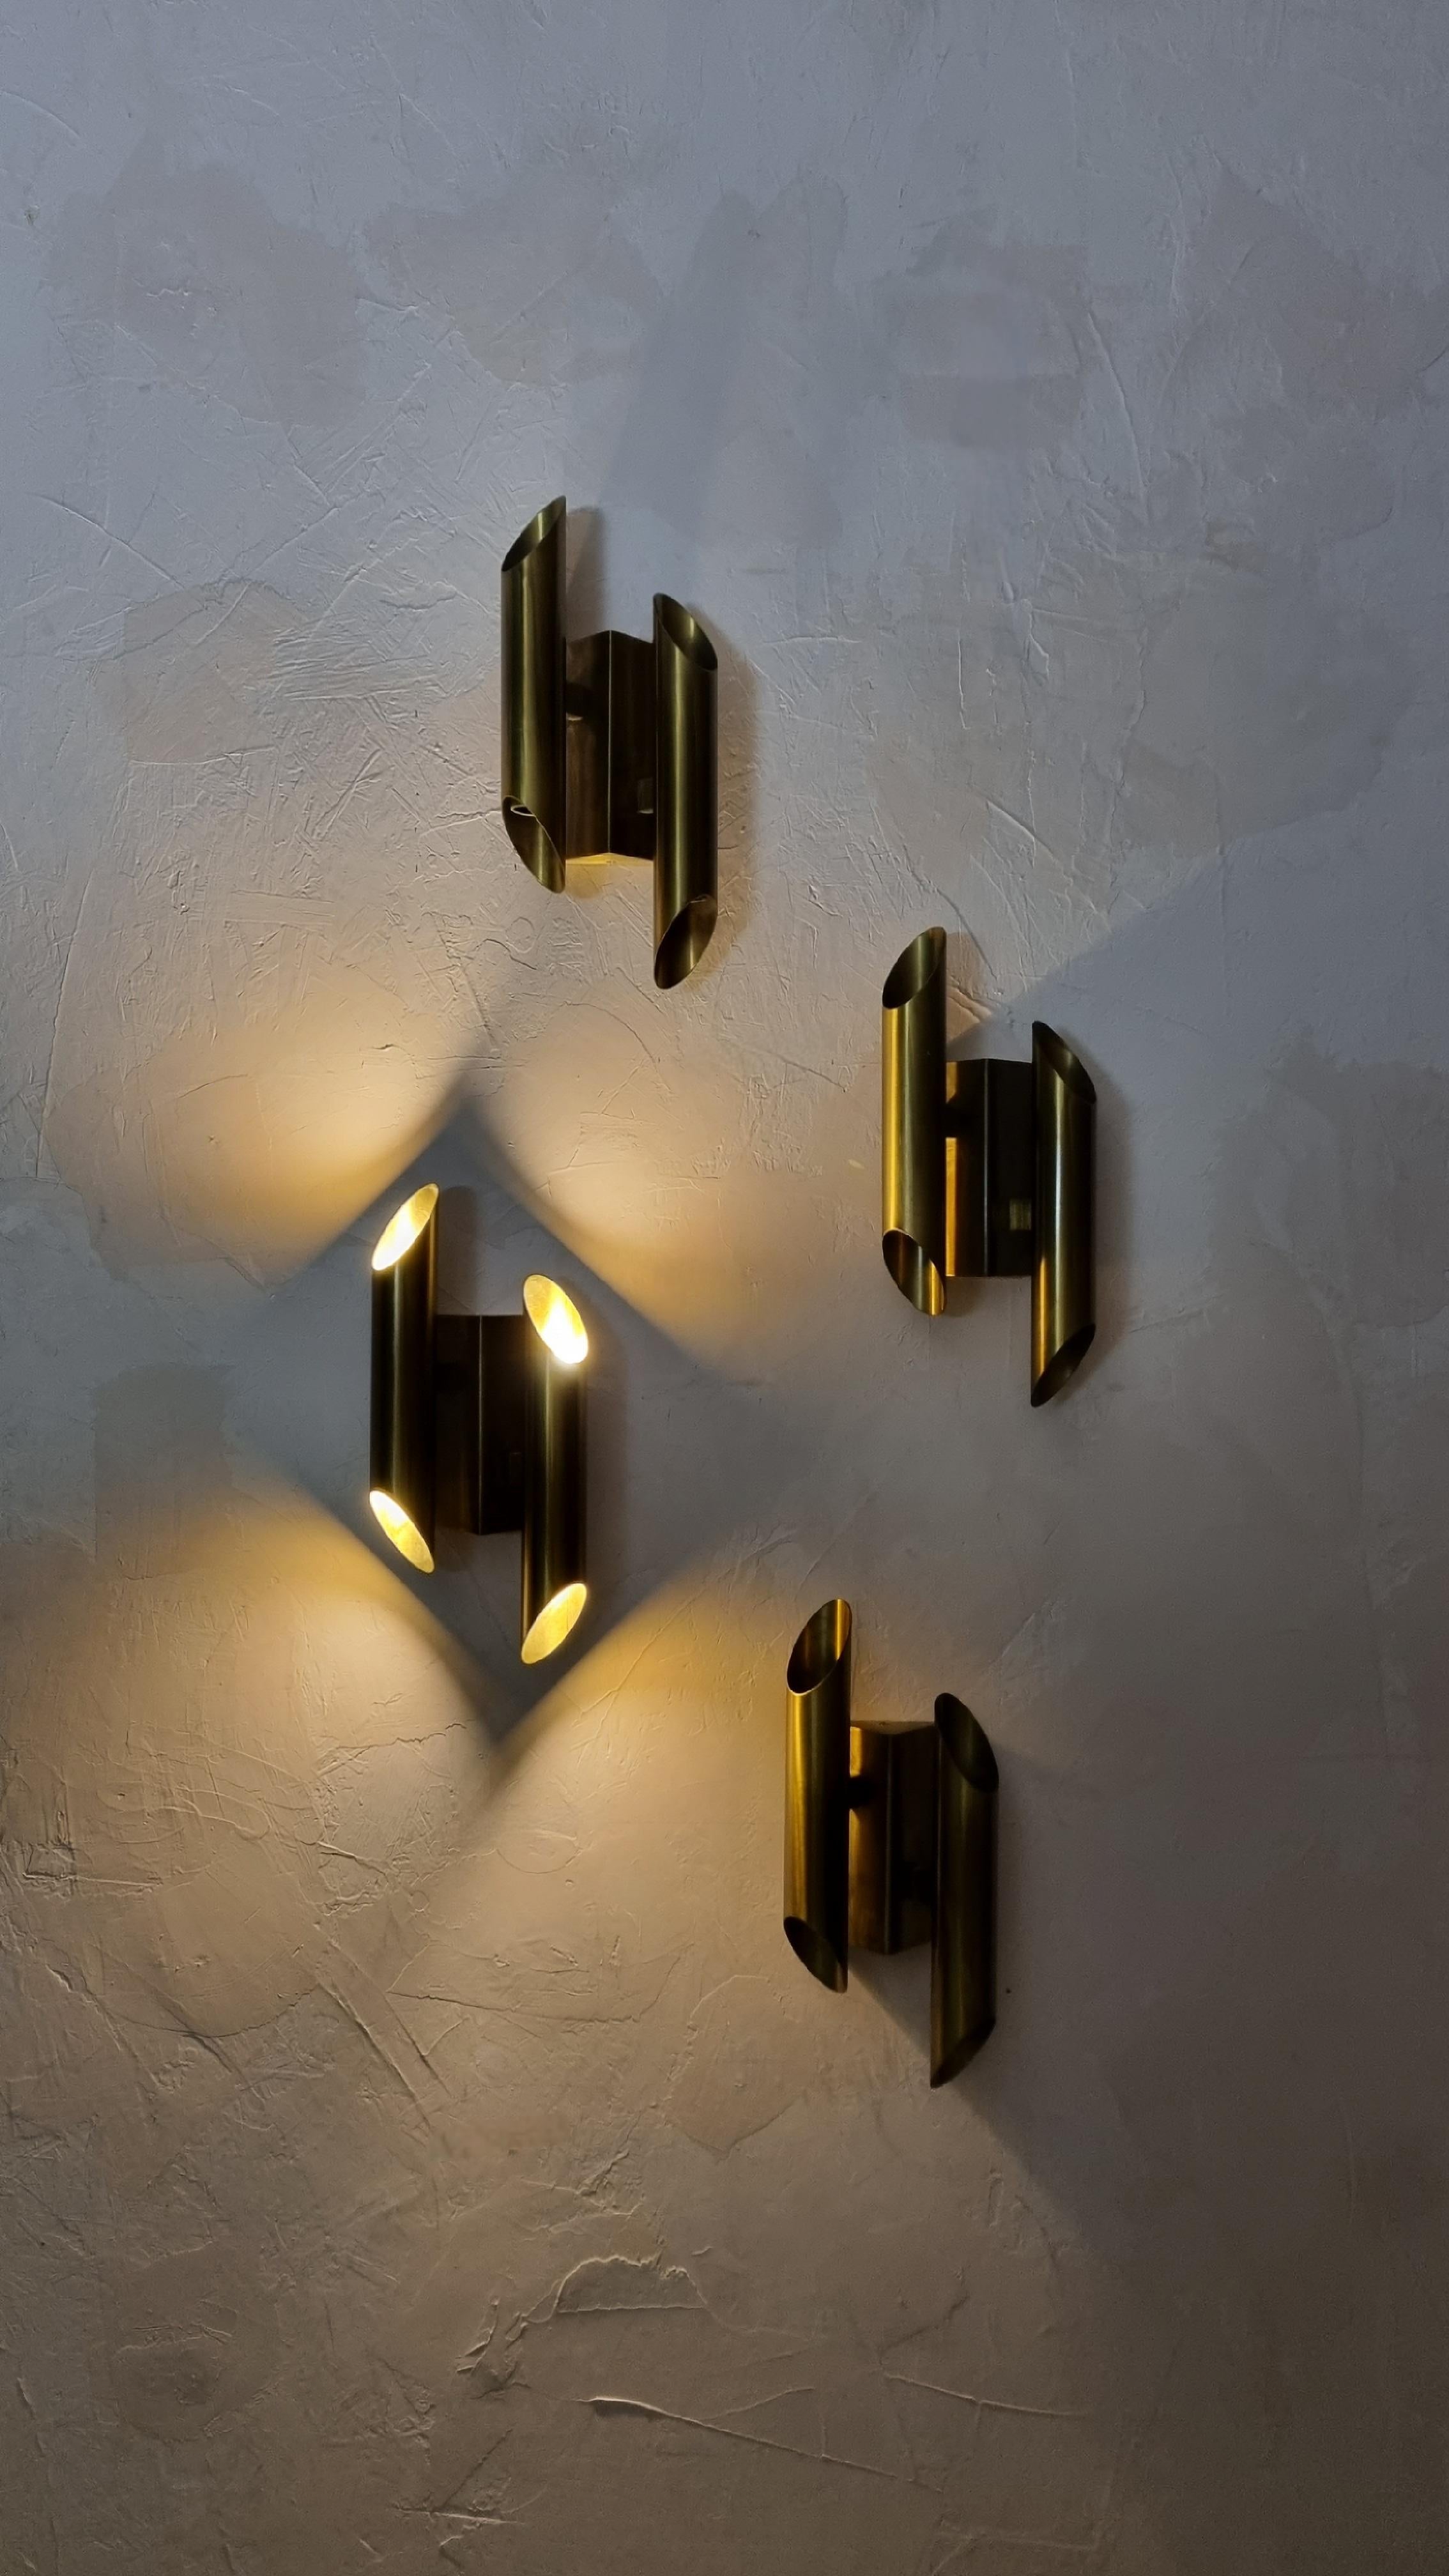 Rare set of 4 wall lamps mod. Carciofo designed by Gianni Celada for Fontana Arte in 1970.
Brass frame, 4 light points, revised original wiring.

Born in Milan in 1935, he graduated in Architecture from the Polytechnic, where in 1986 he became